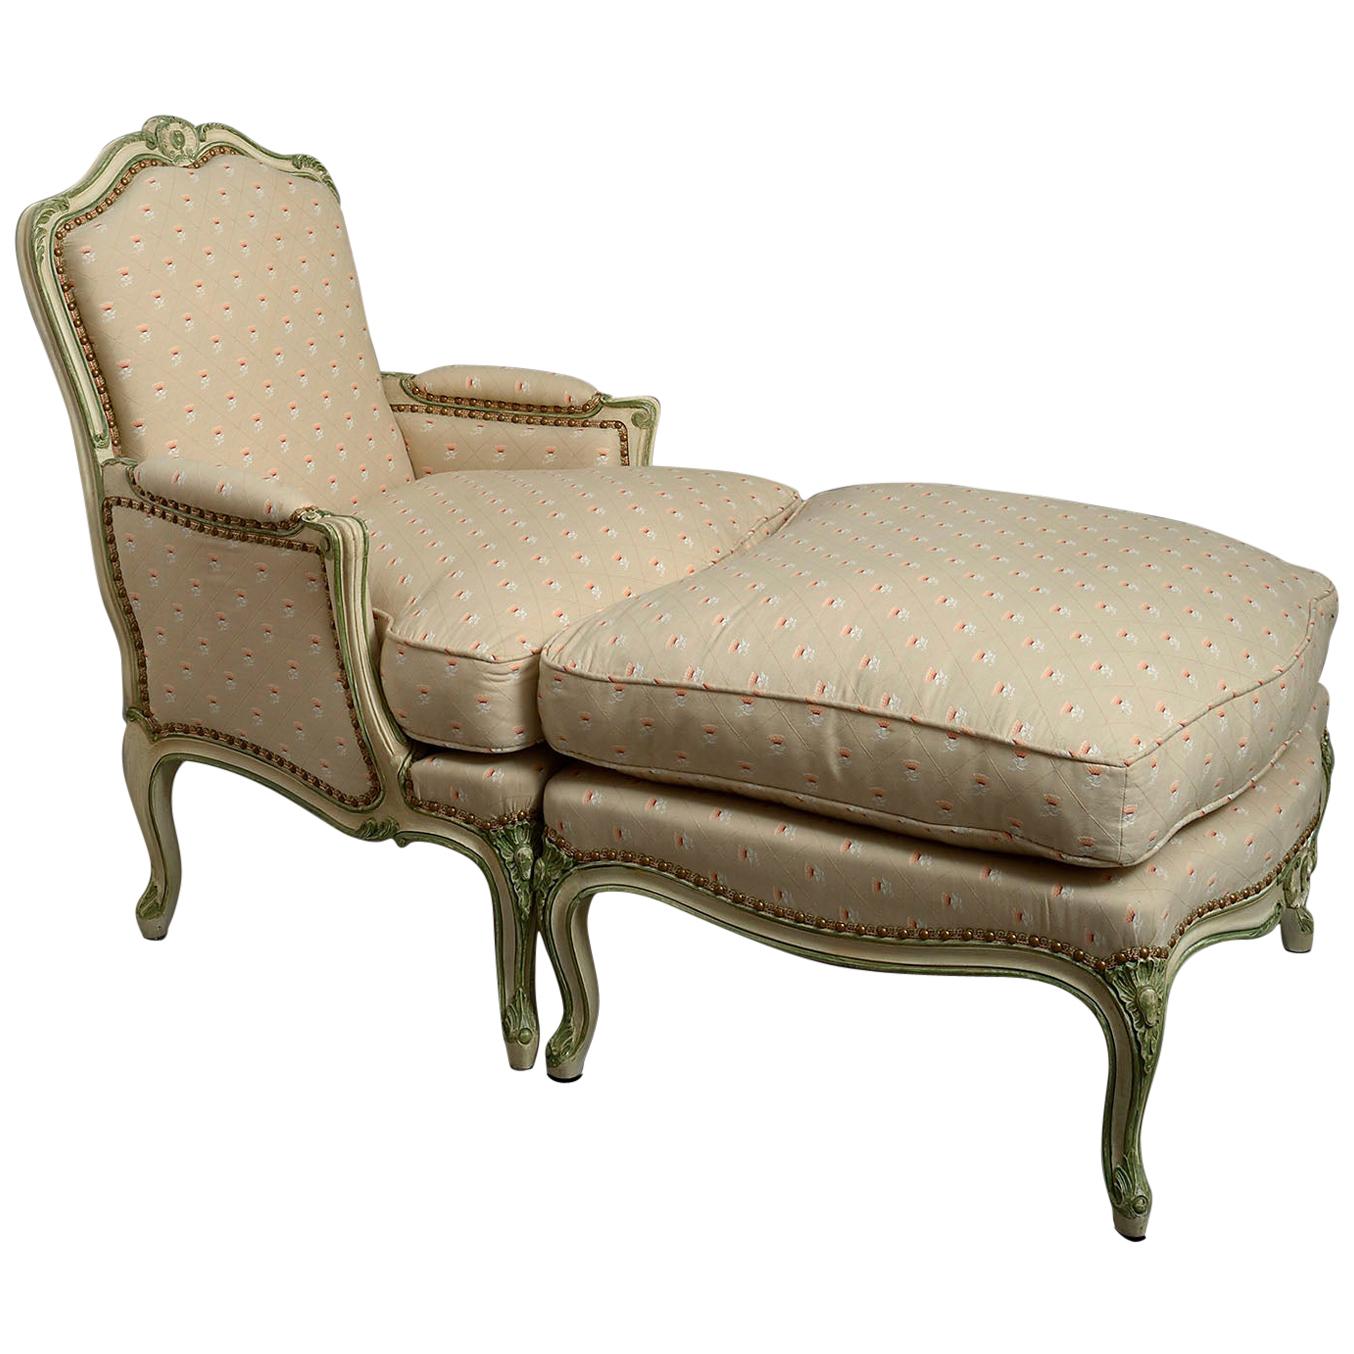 Early 20th Century Louis XV Style Duchesse Brisée